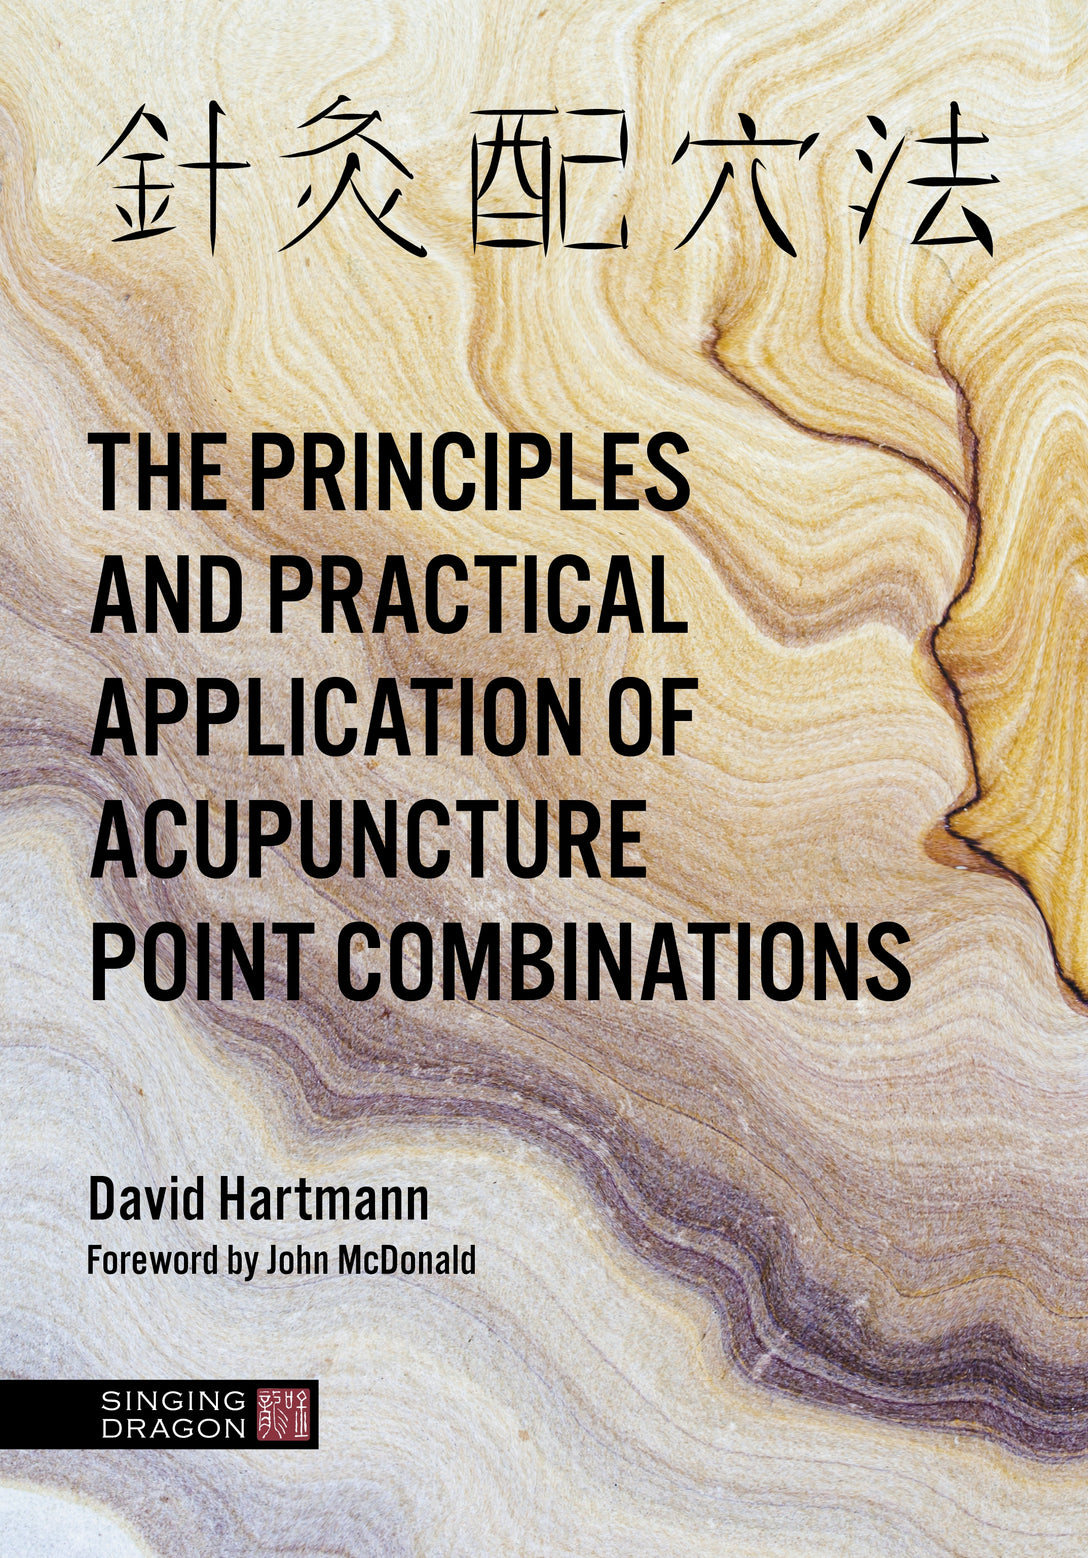 The Principles and Practical Application of Acupuncture Point Combinations by John McDonald, David Hartmann